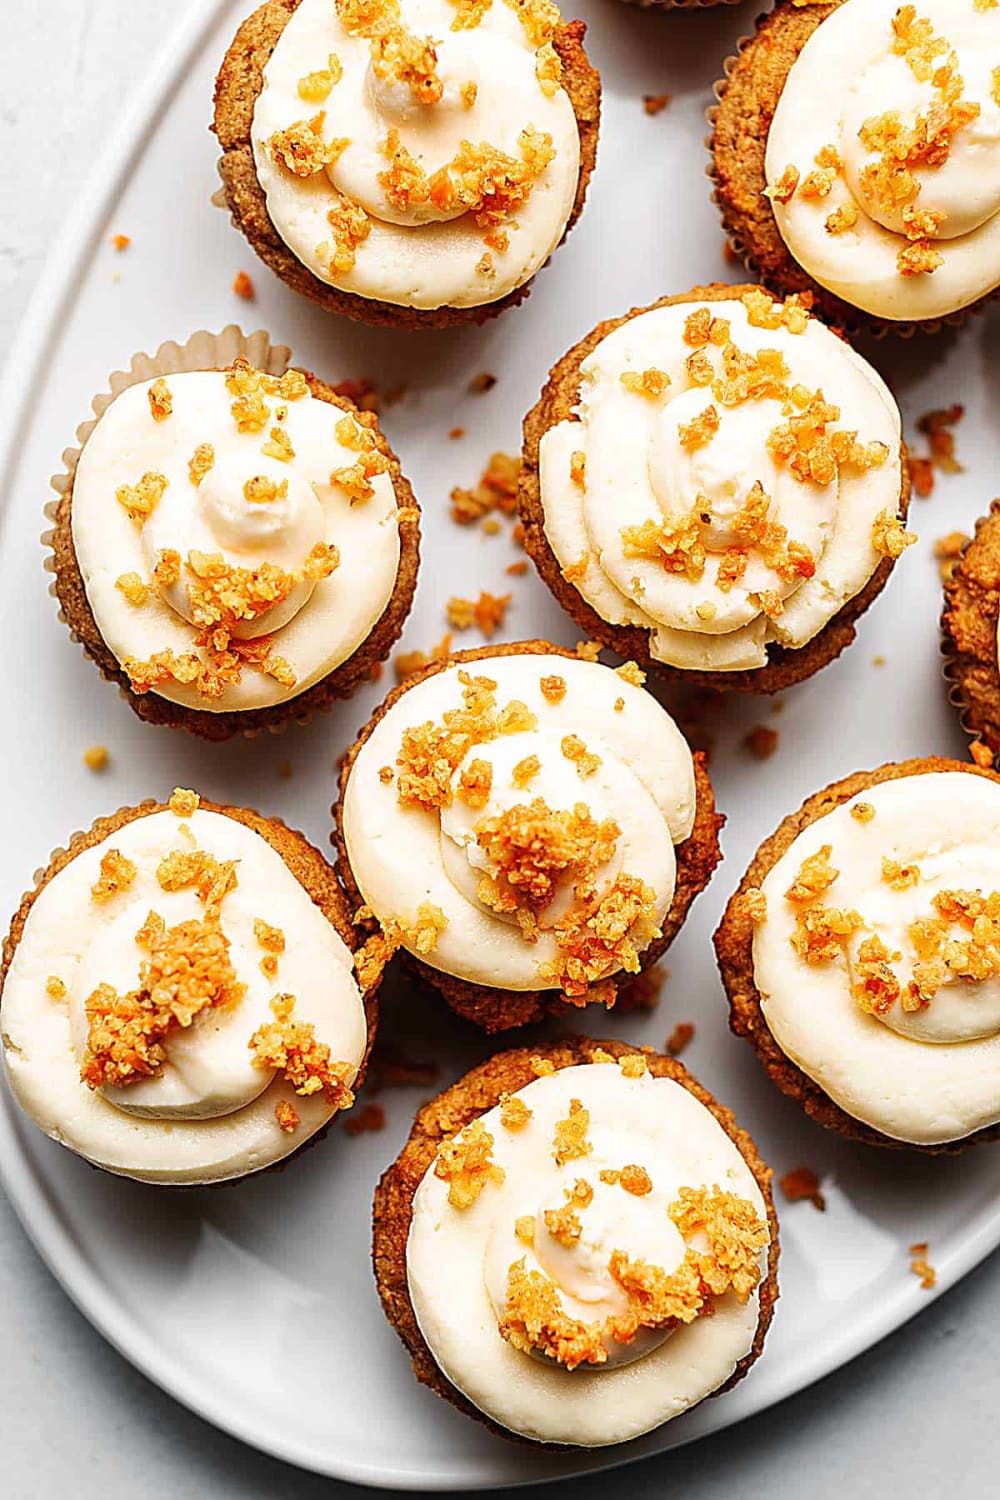 From Carrot Cake Cupcakes and Cookies to Classic Carrot Cake, These 22 Recipes Are So Good